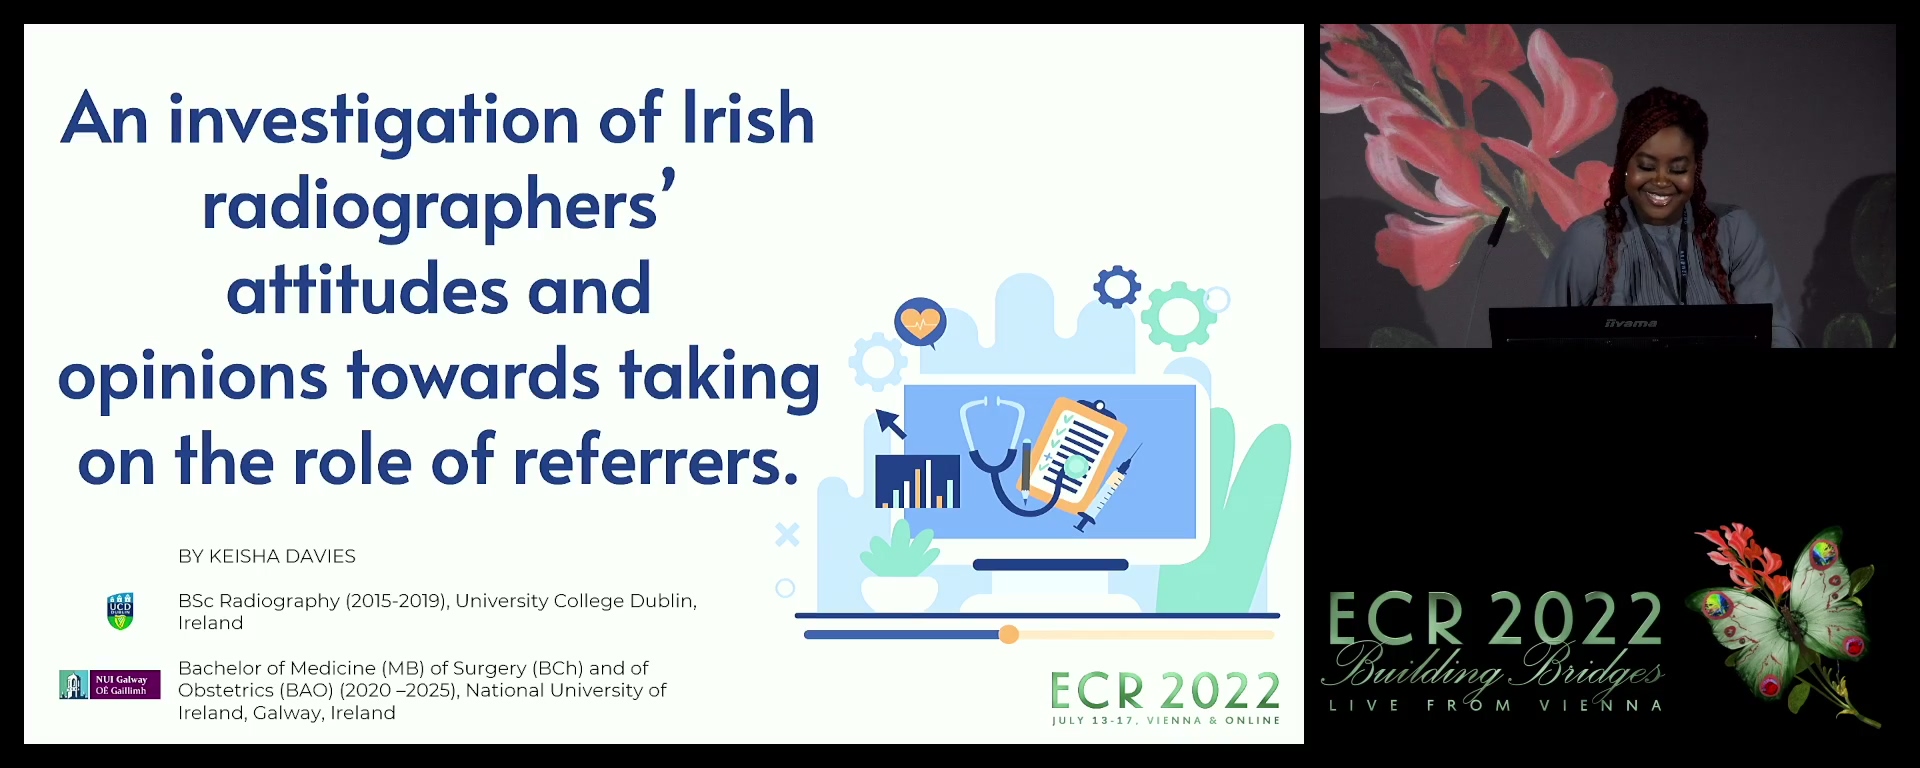 An investigation of Irish radiographers’ attitudes and opinions on taking on the role of referrers. - Keisha Davies, Prosperous / IE